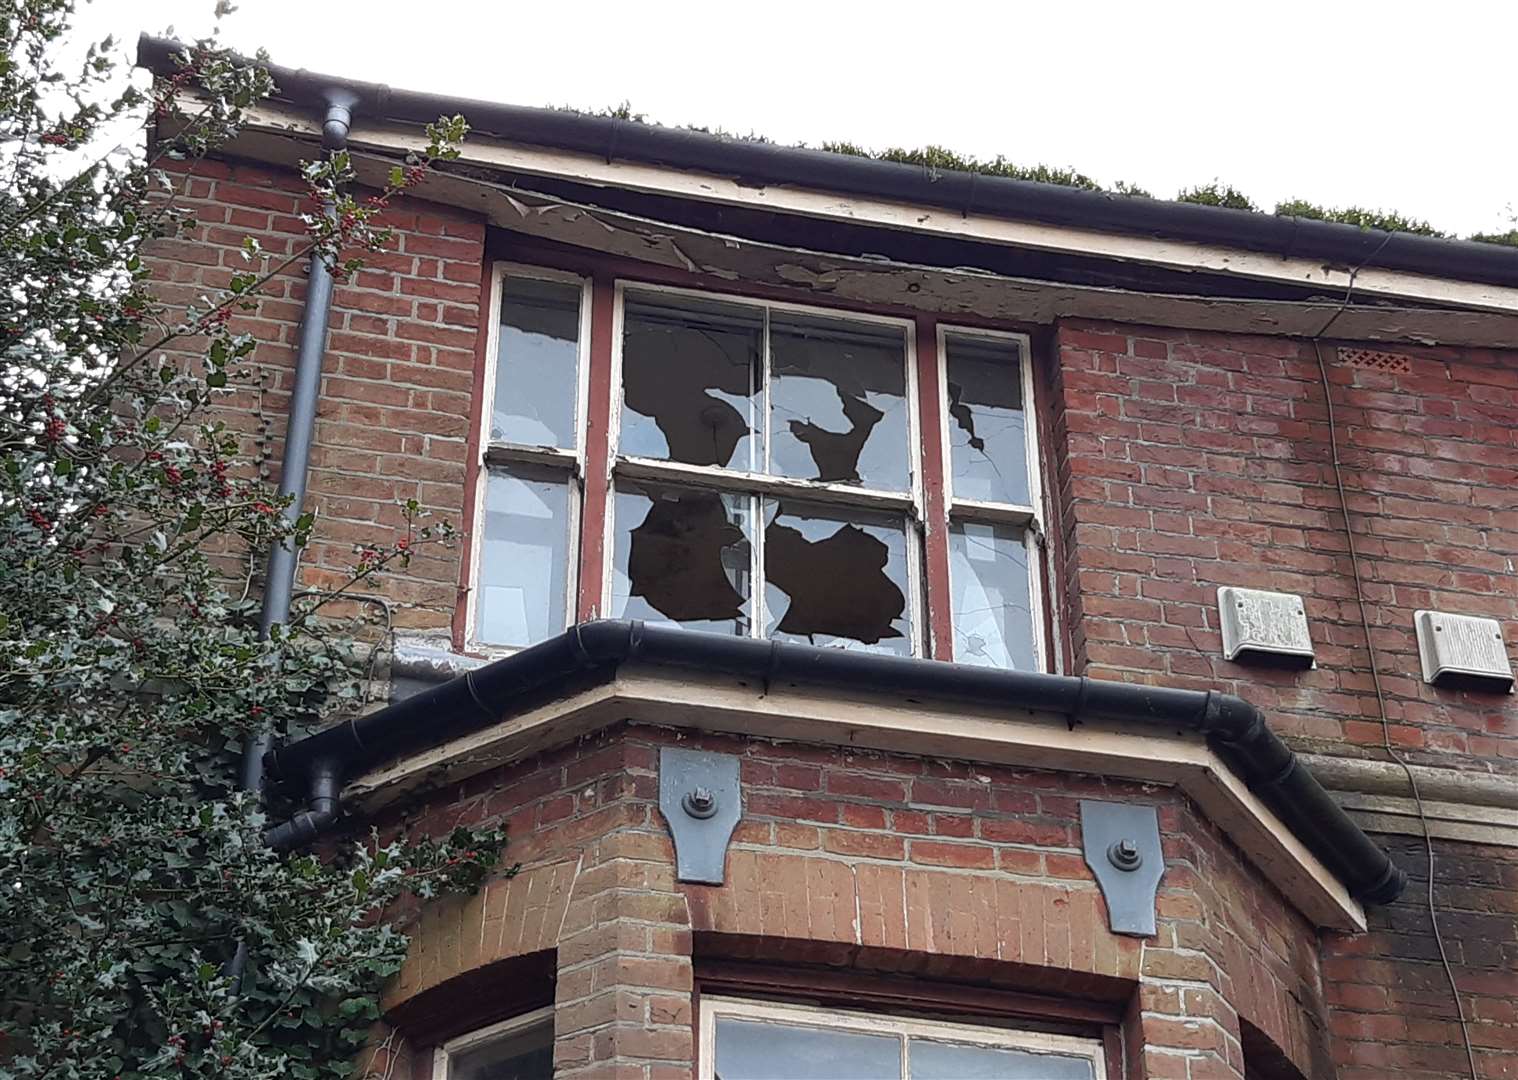 Several windows are smashed